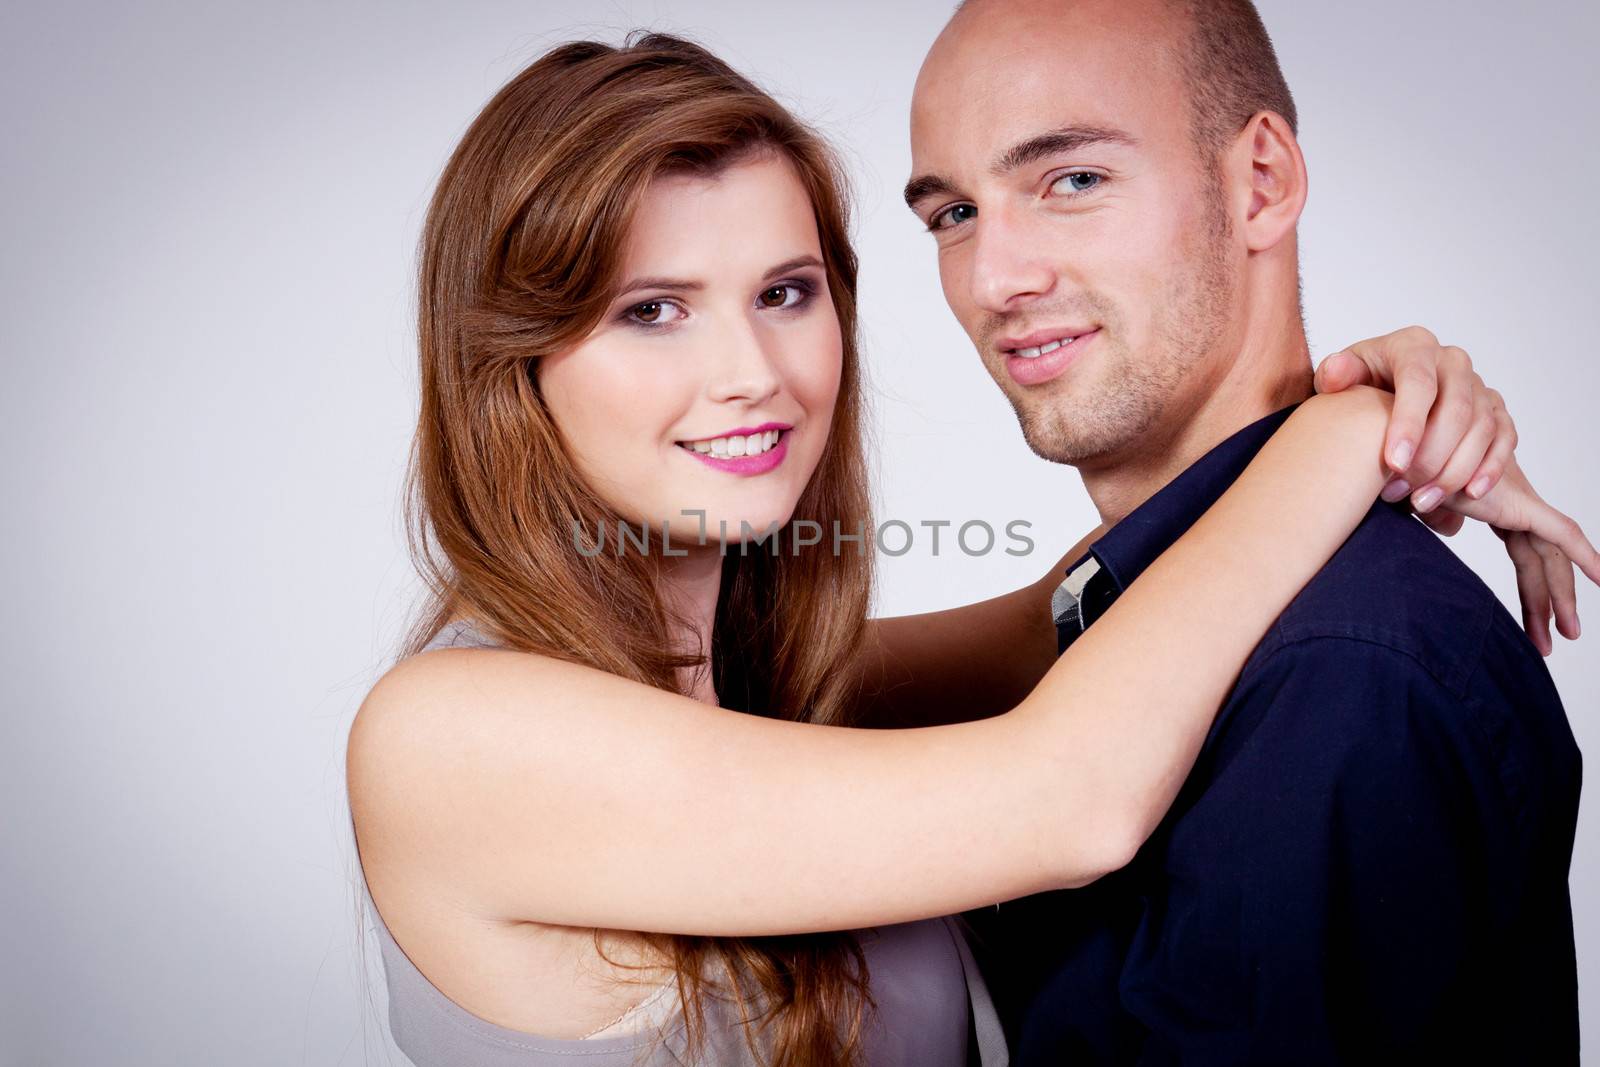 young attractive couple in love embracing portrait on grey backgound 